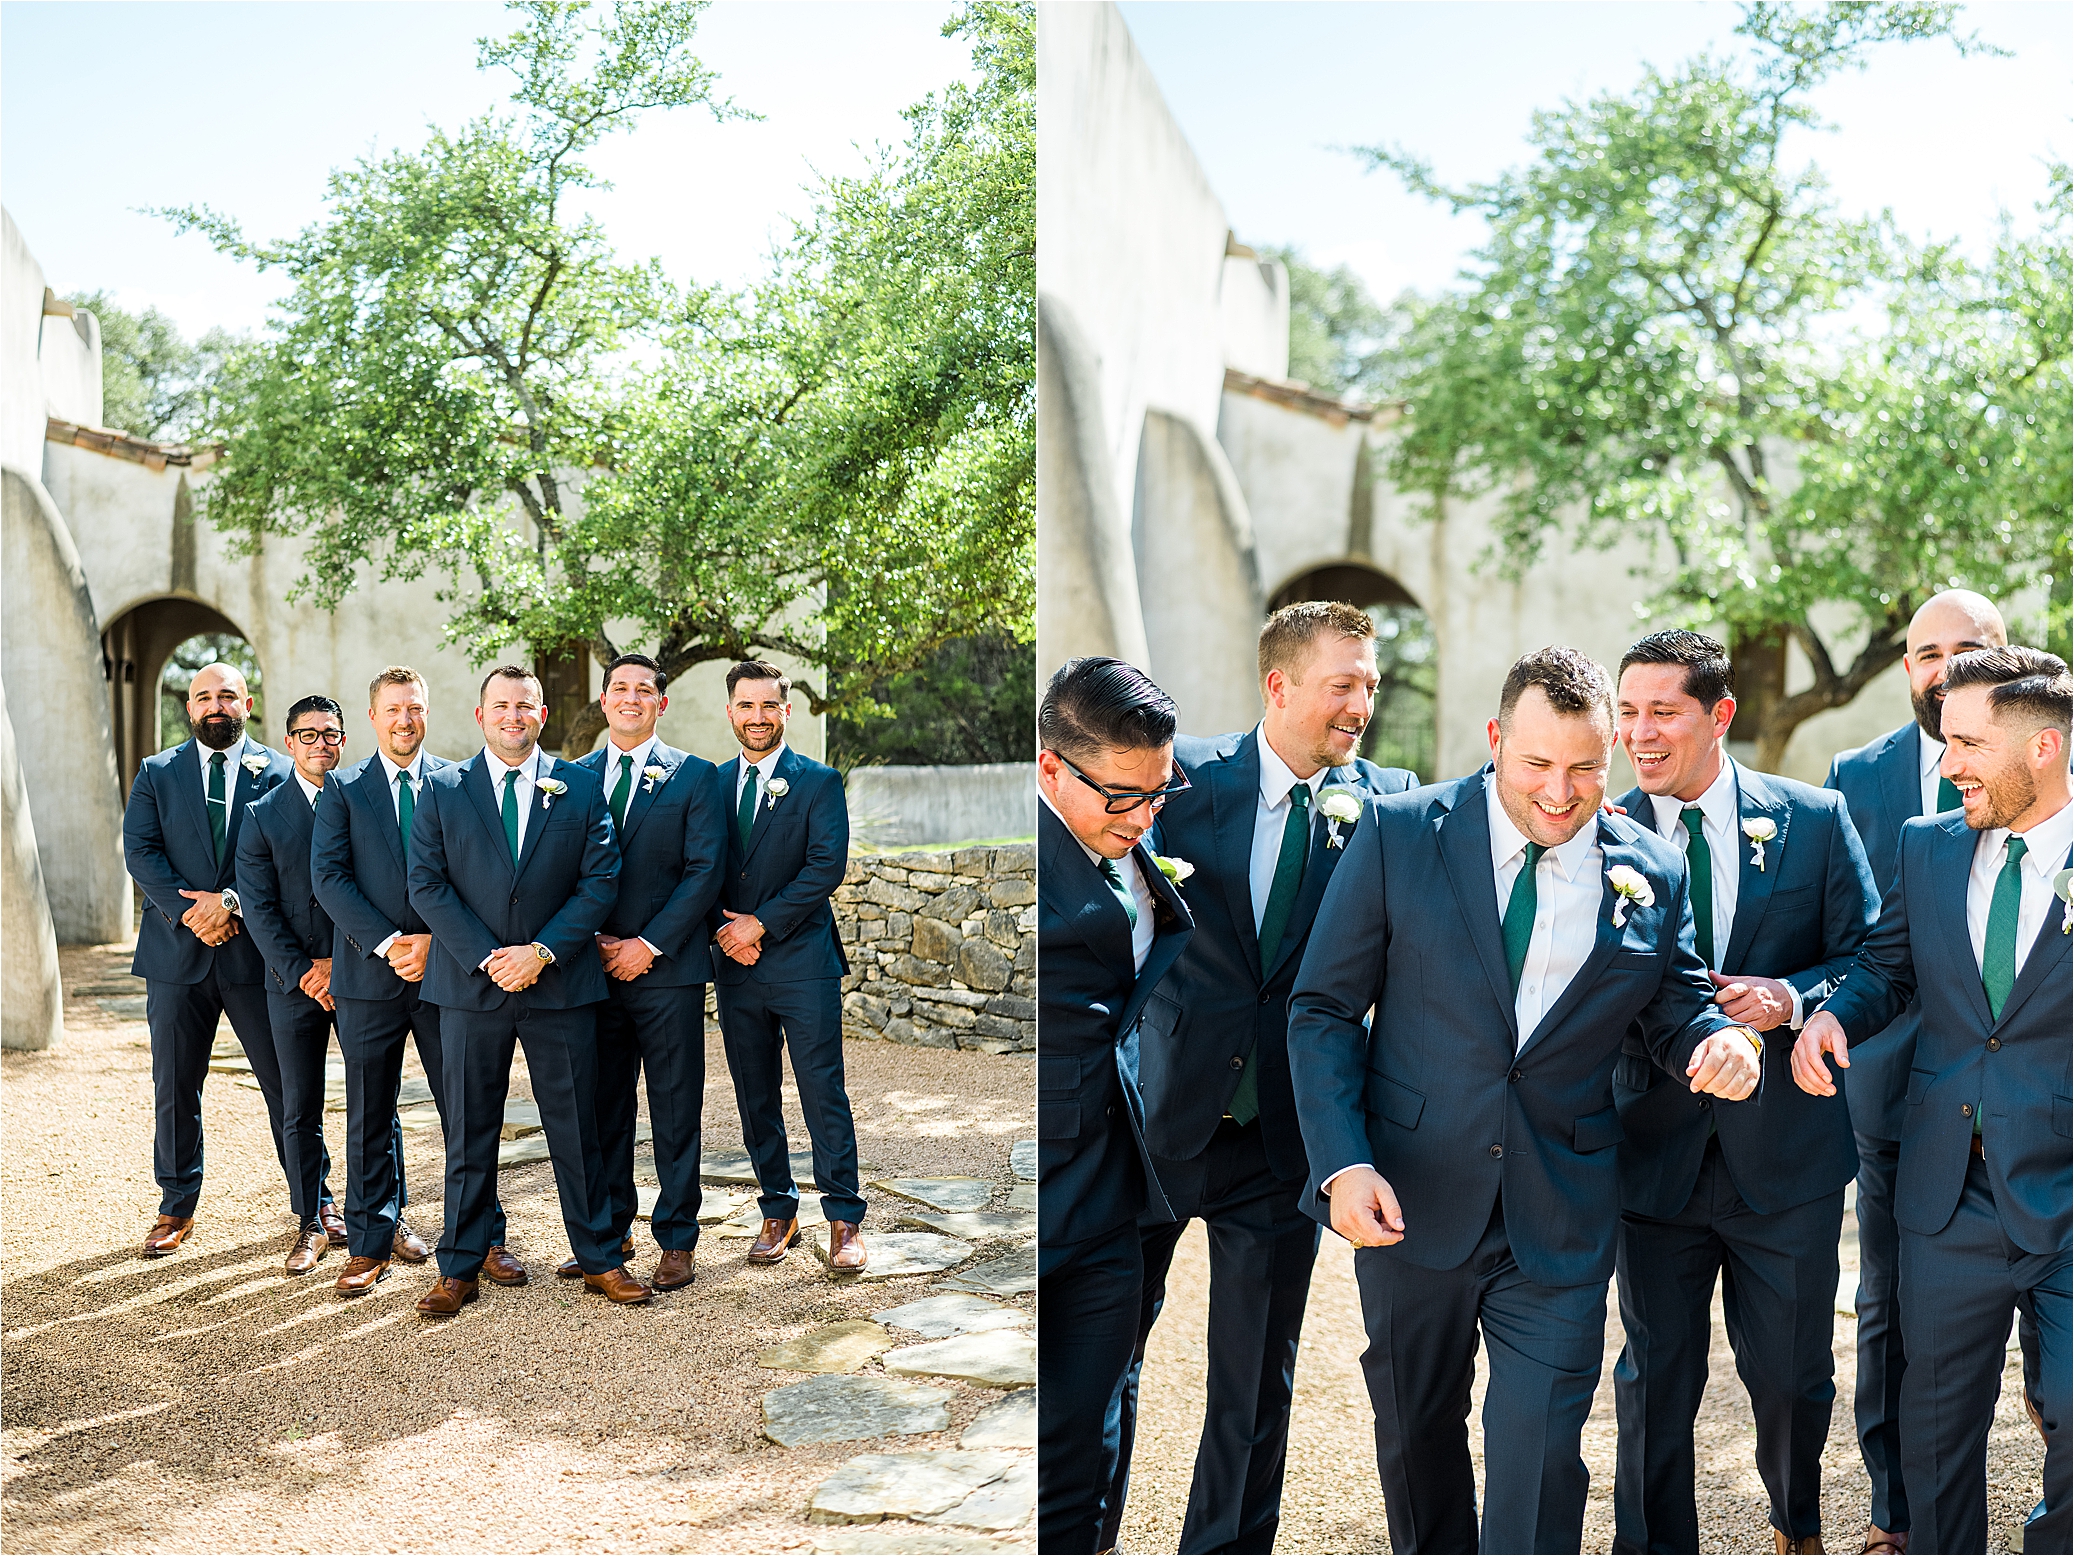 A groom and is groomsmen mess with each other and laugh during portraits on wedding day at Lost Mission